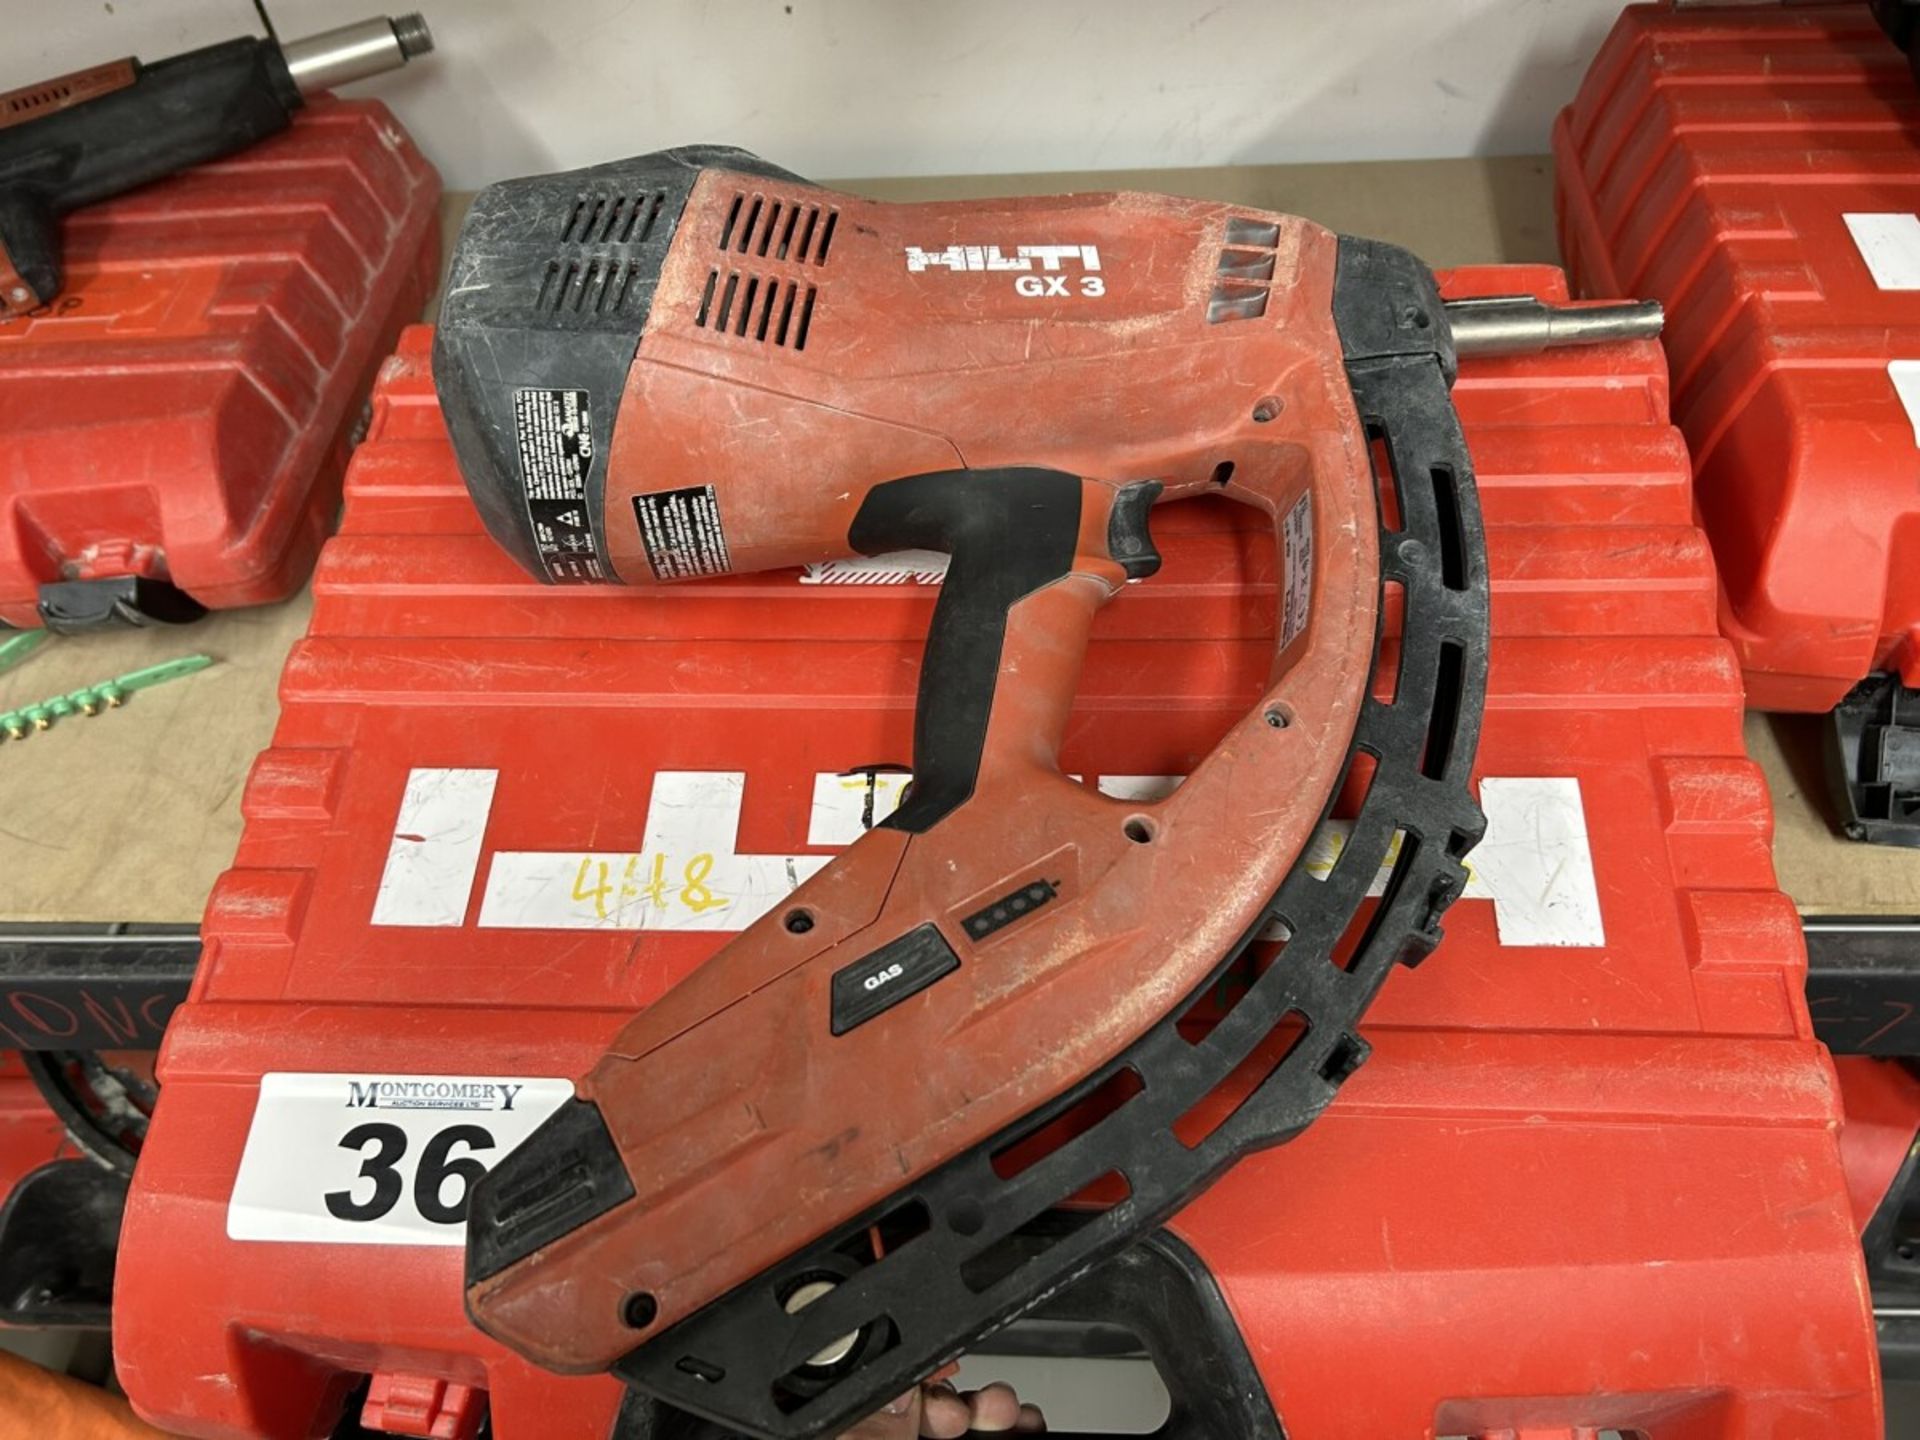 HILTI GX 3 GAS-ACTUATED FASTENING TOOL GAS NAILER WITH SINGLE POWER SOURCE FOR DRYWALL TRACK, - Image 3 of 6